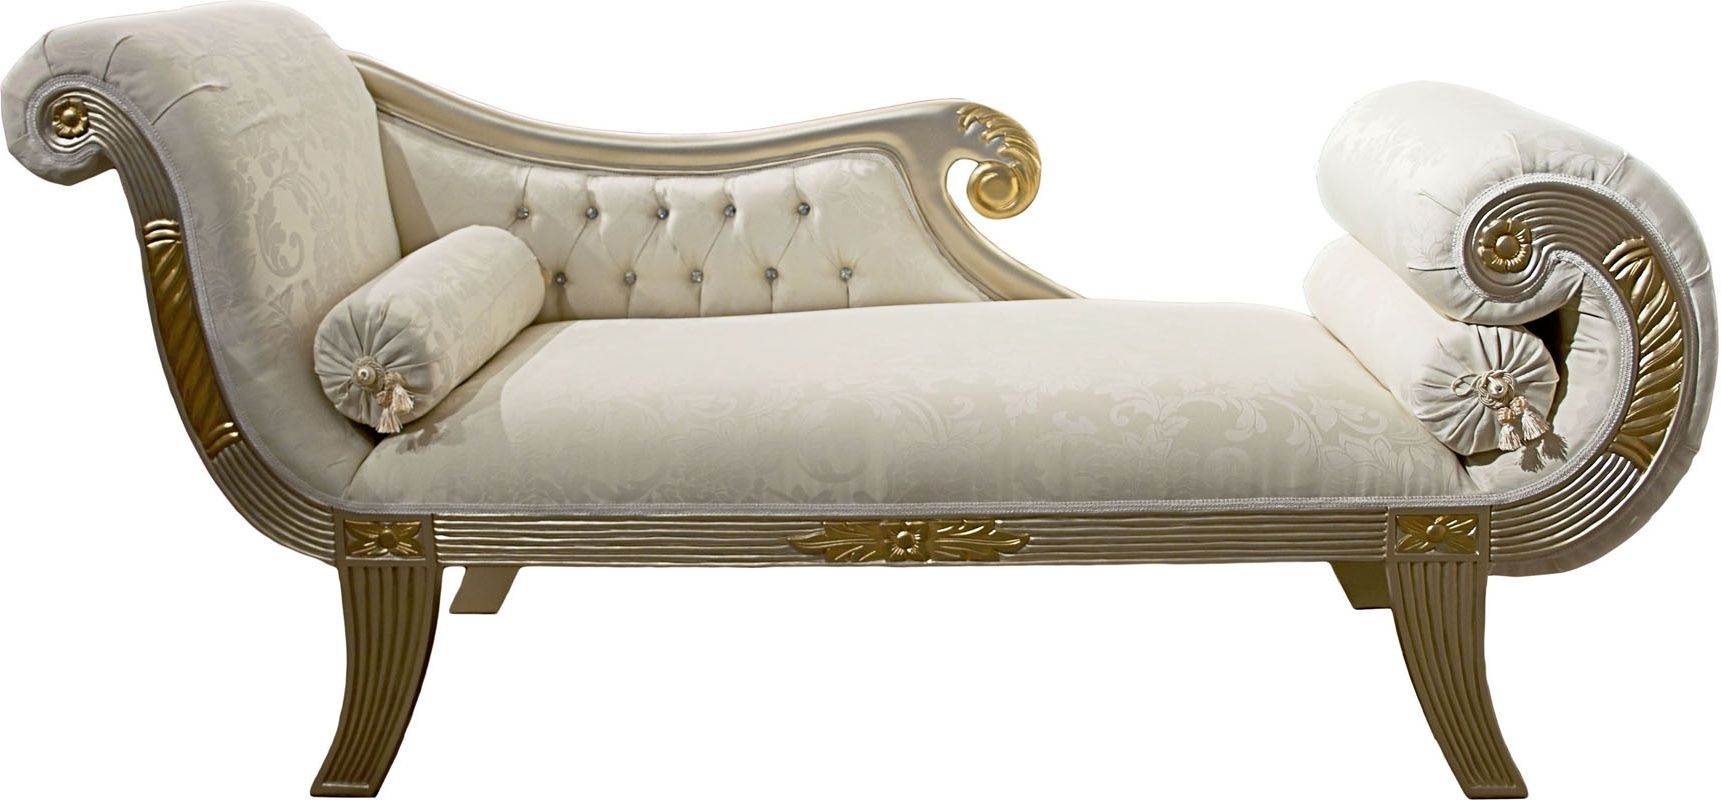 Elegant Chaise Lounge Chairs Regarding Popular White Leather Vintage Chaise Lounge Chair In Victorian Style Plus (View 1 of 15)